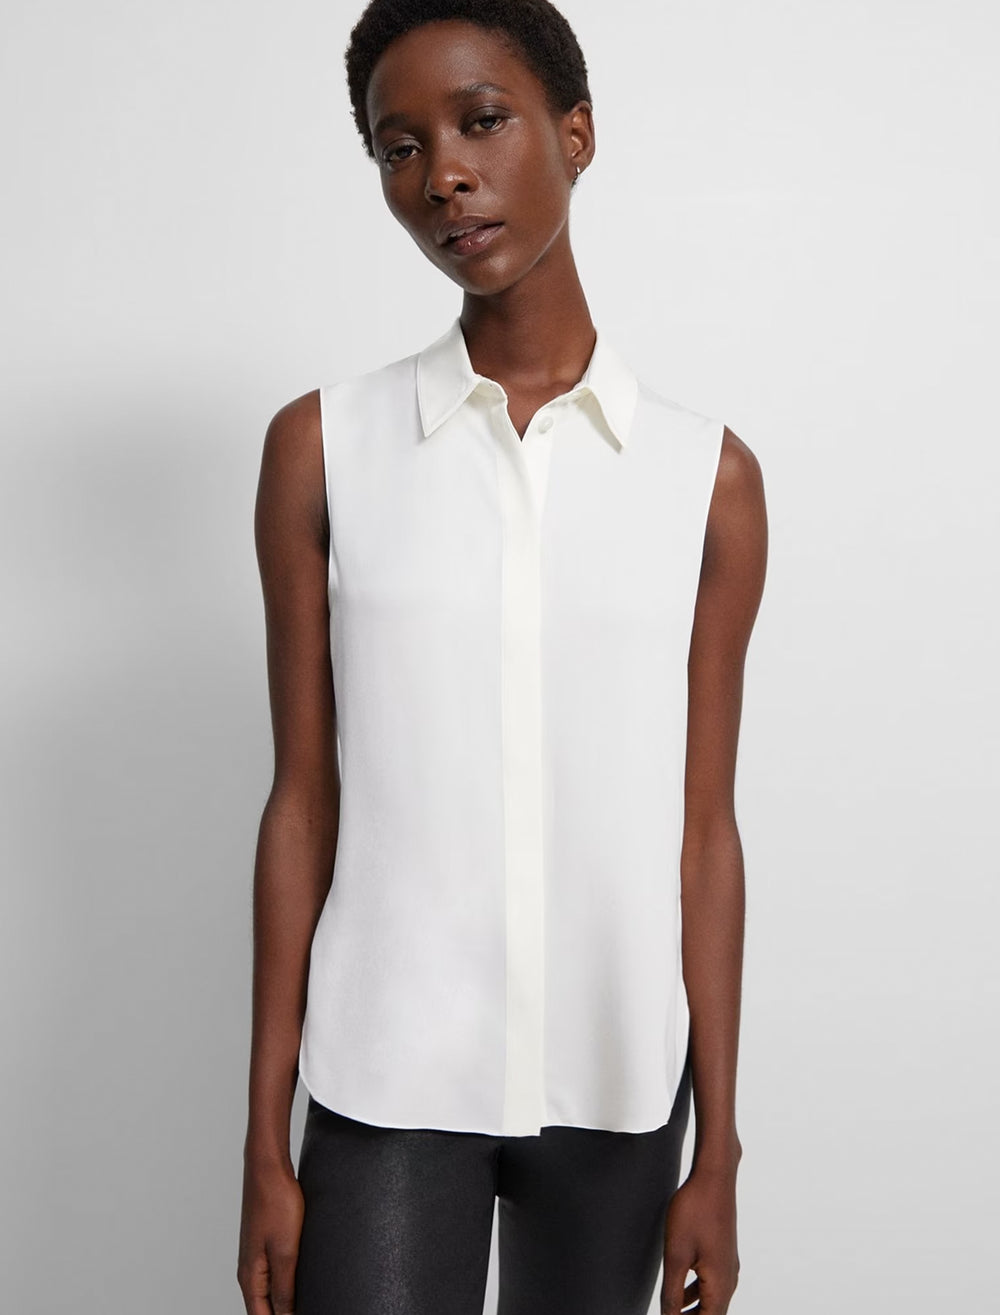 Model wearing Theory's tanelis modern sleeveless blouse in ivory.